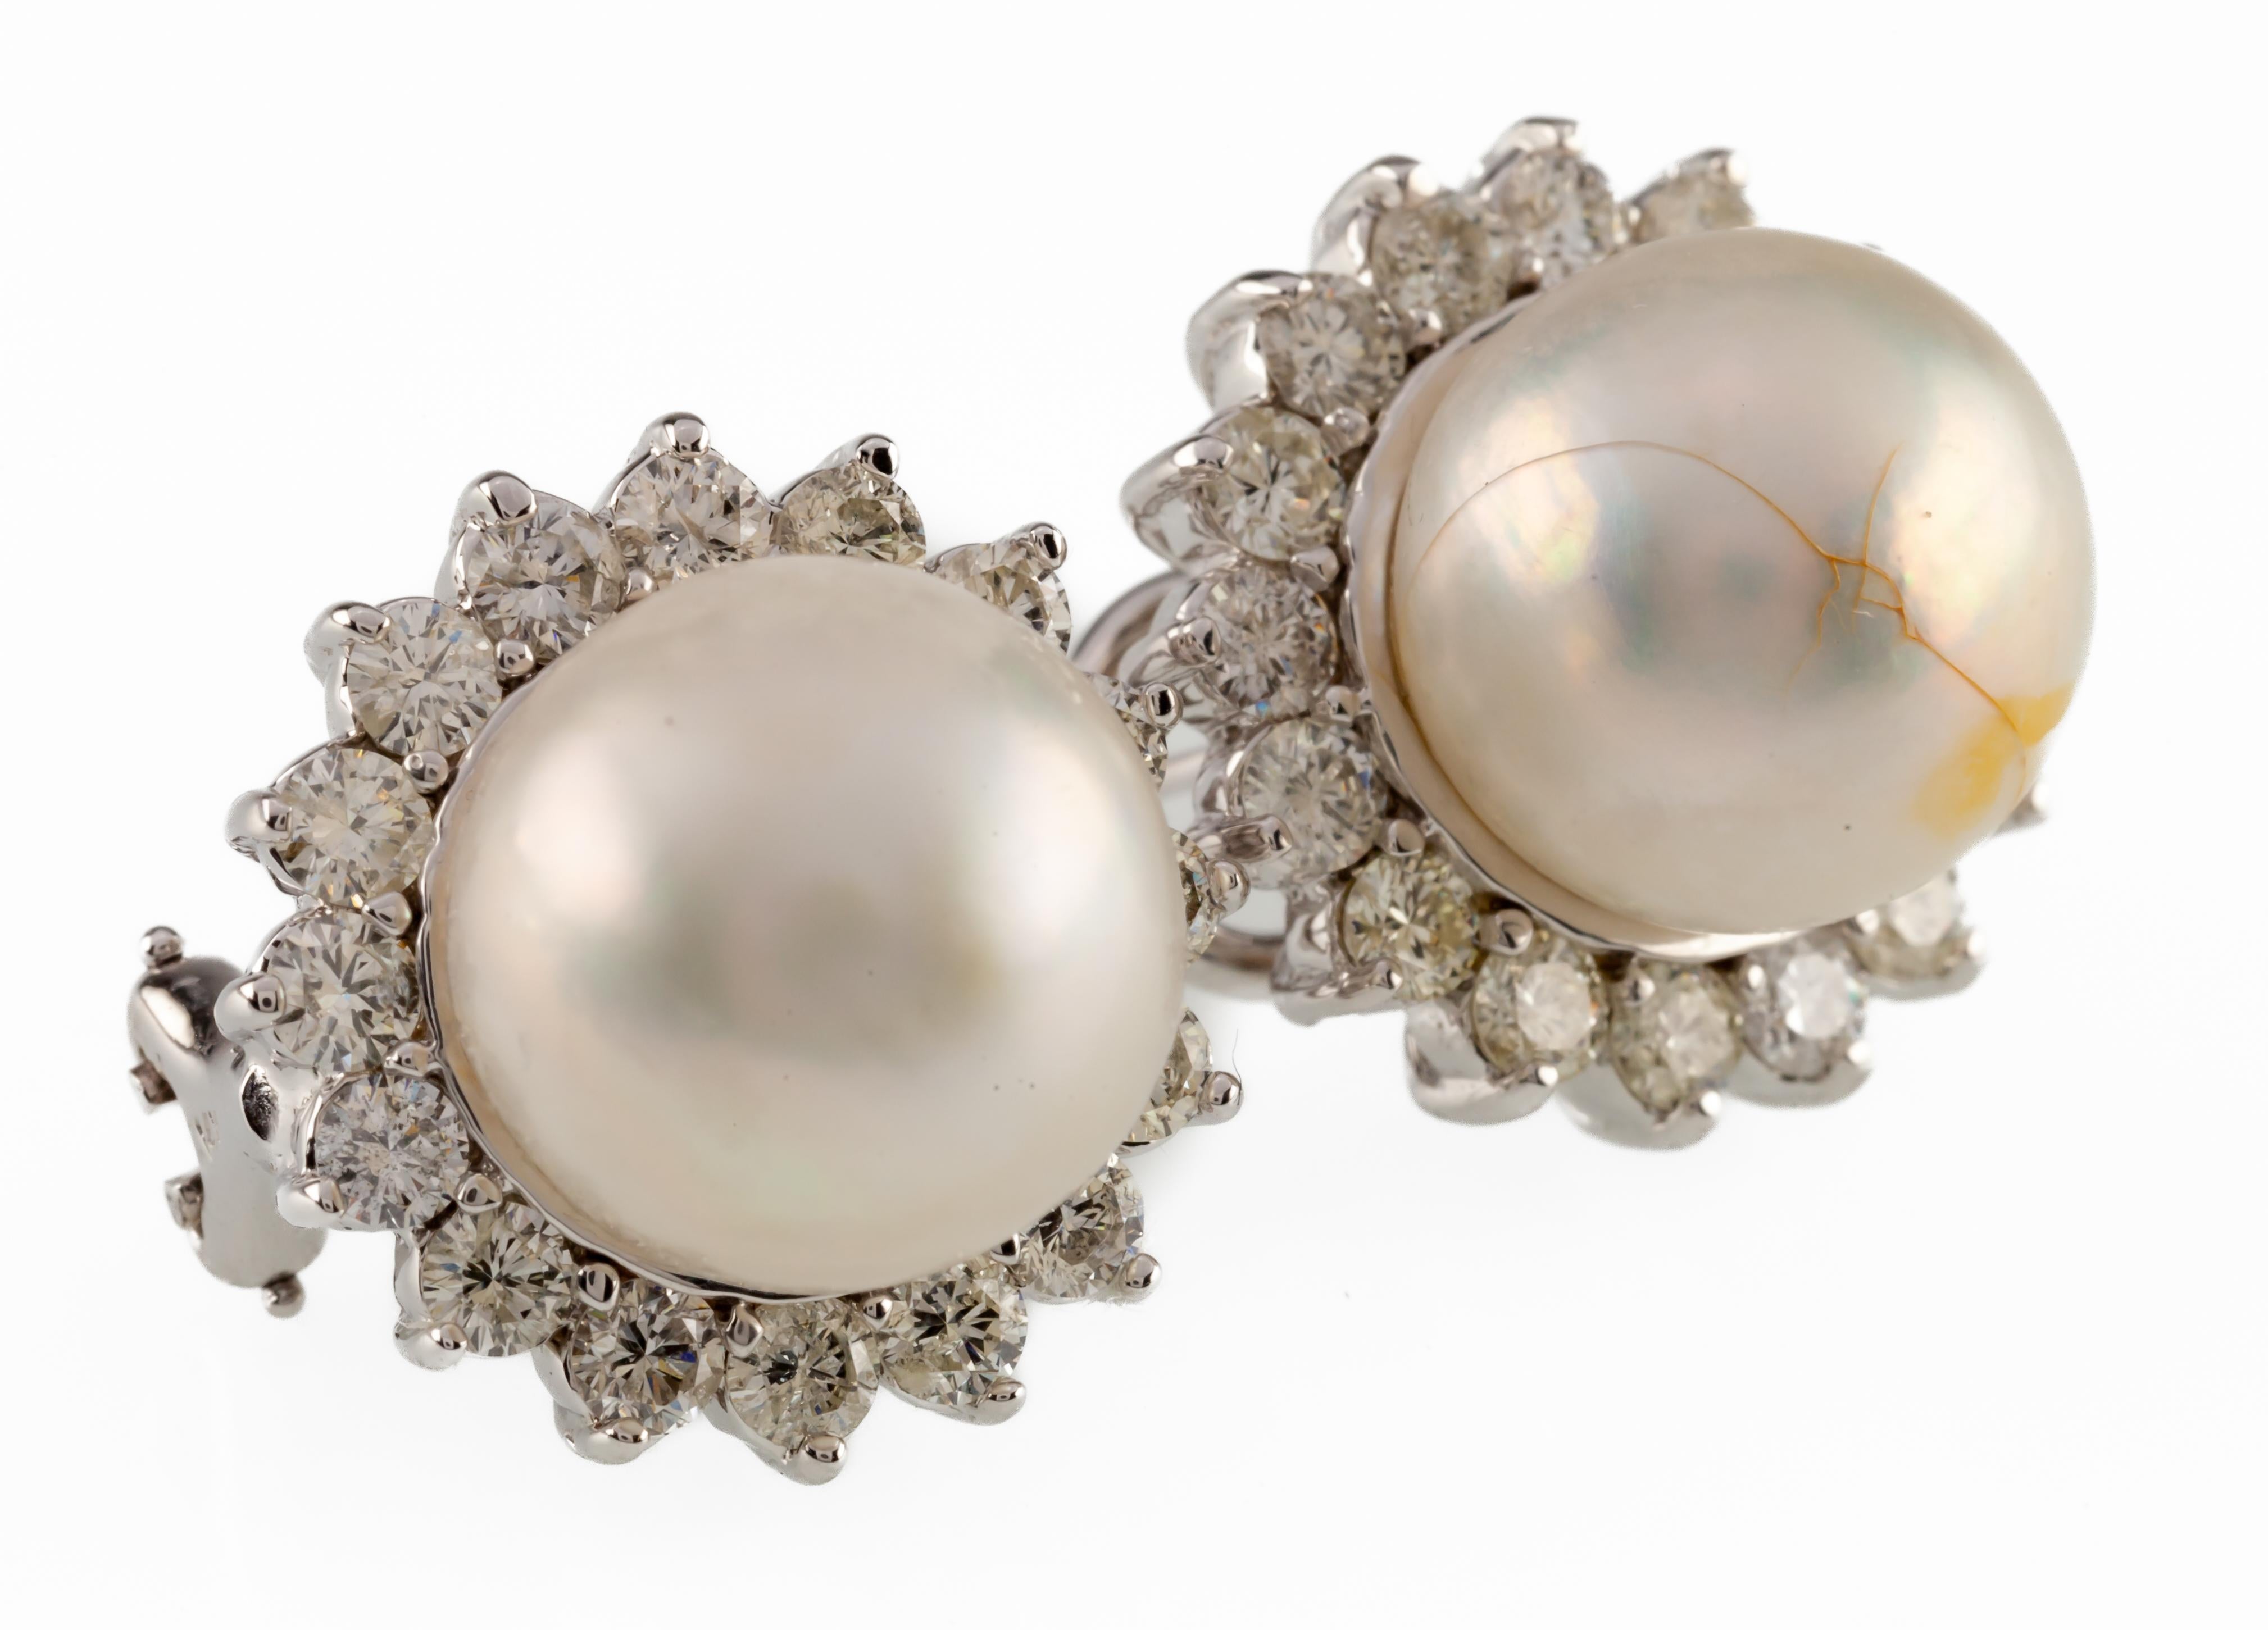 One pair electronically tested 14KT white gold cast & assembled South Sea cultured pearl & diamond earrings with omega backs.
Each earrings features a South Sea cultured pearl set within a gallery of diamonds.
Bright polish finish.
Identified with